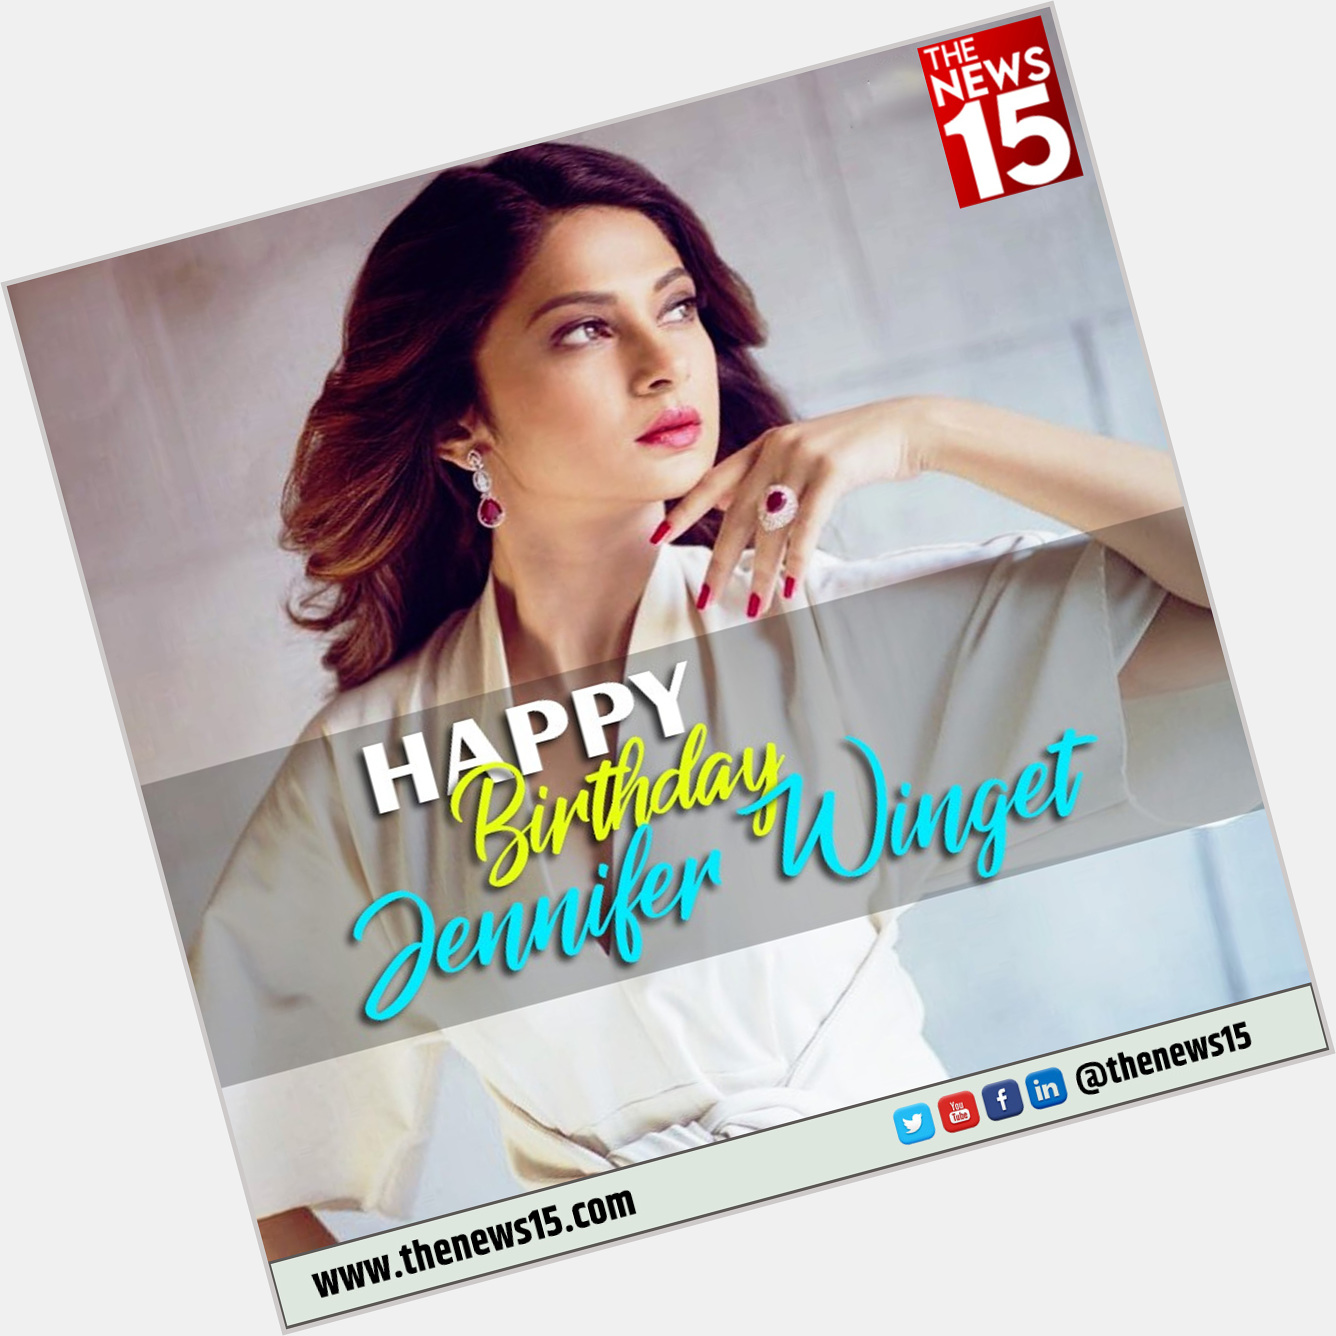 Wishing the beautiful and gorgeous Jennifer Winget a very happy birthday
.
.
.  